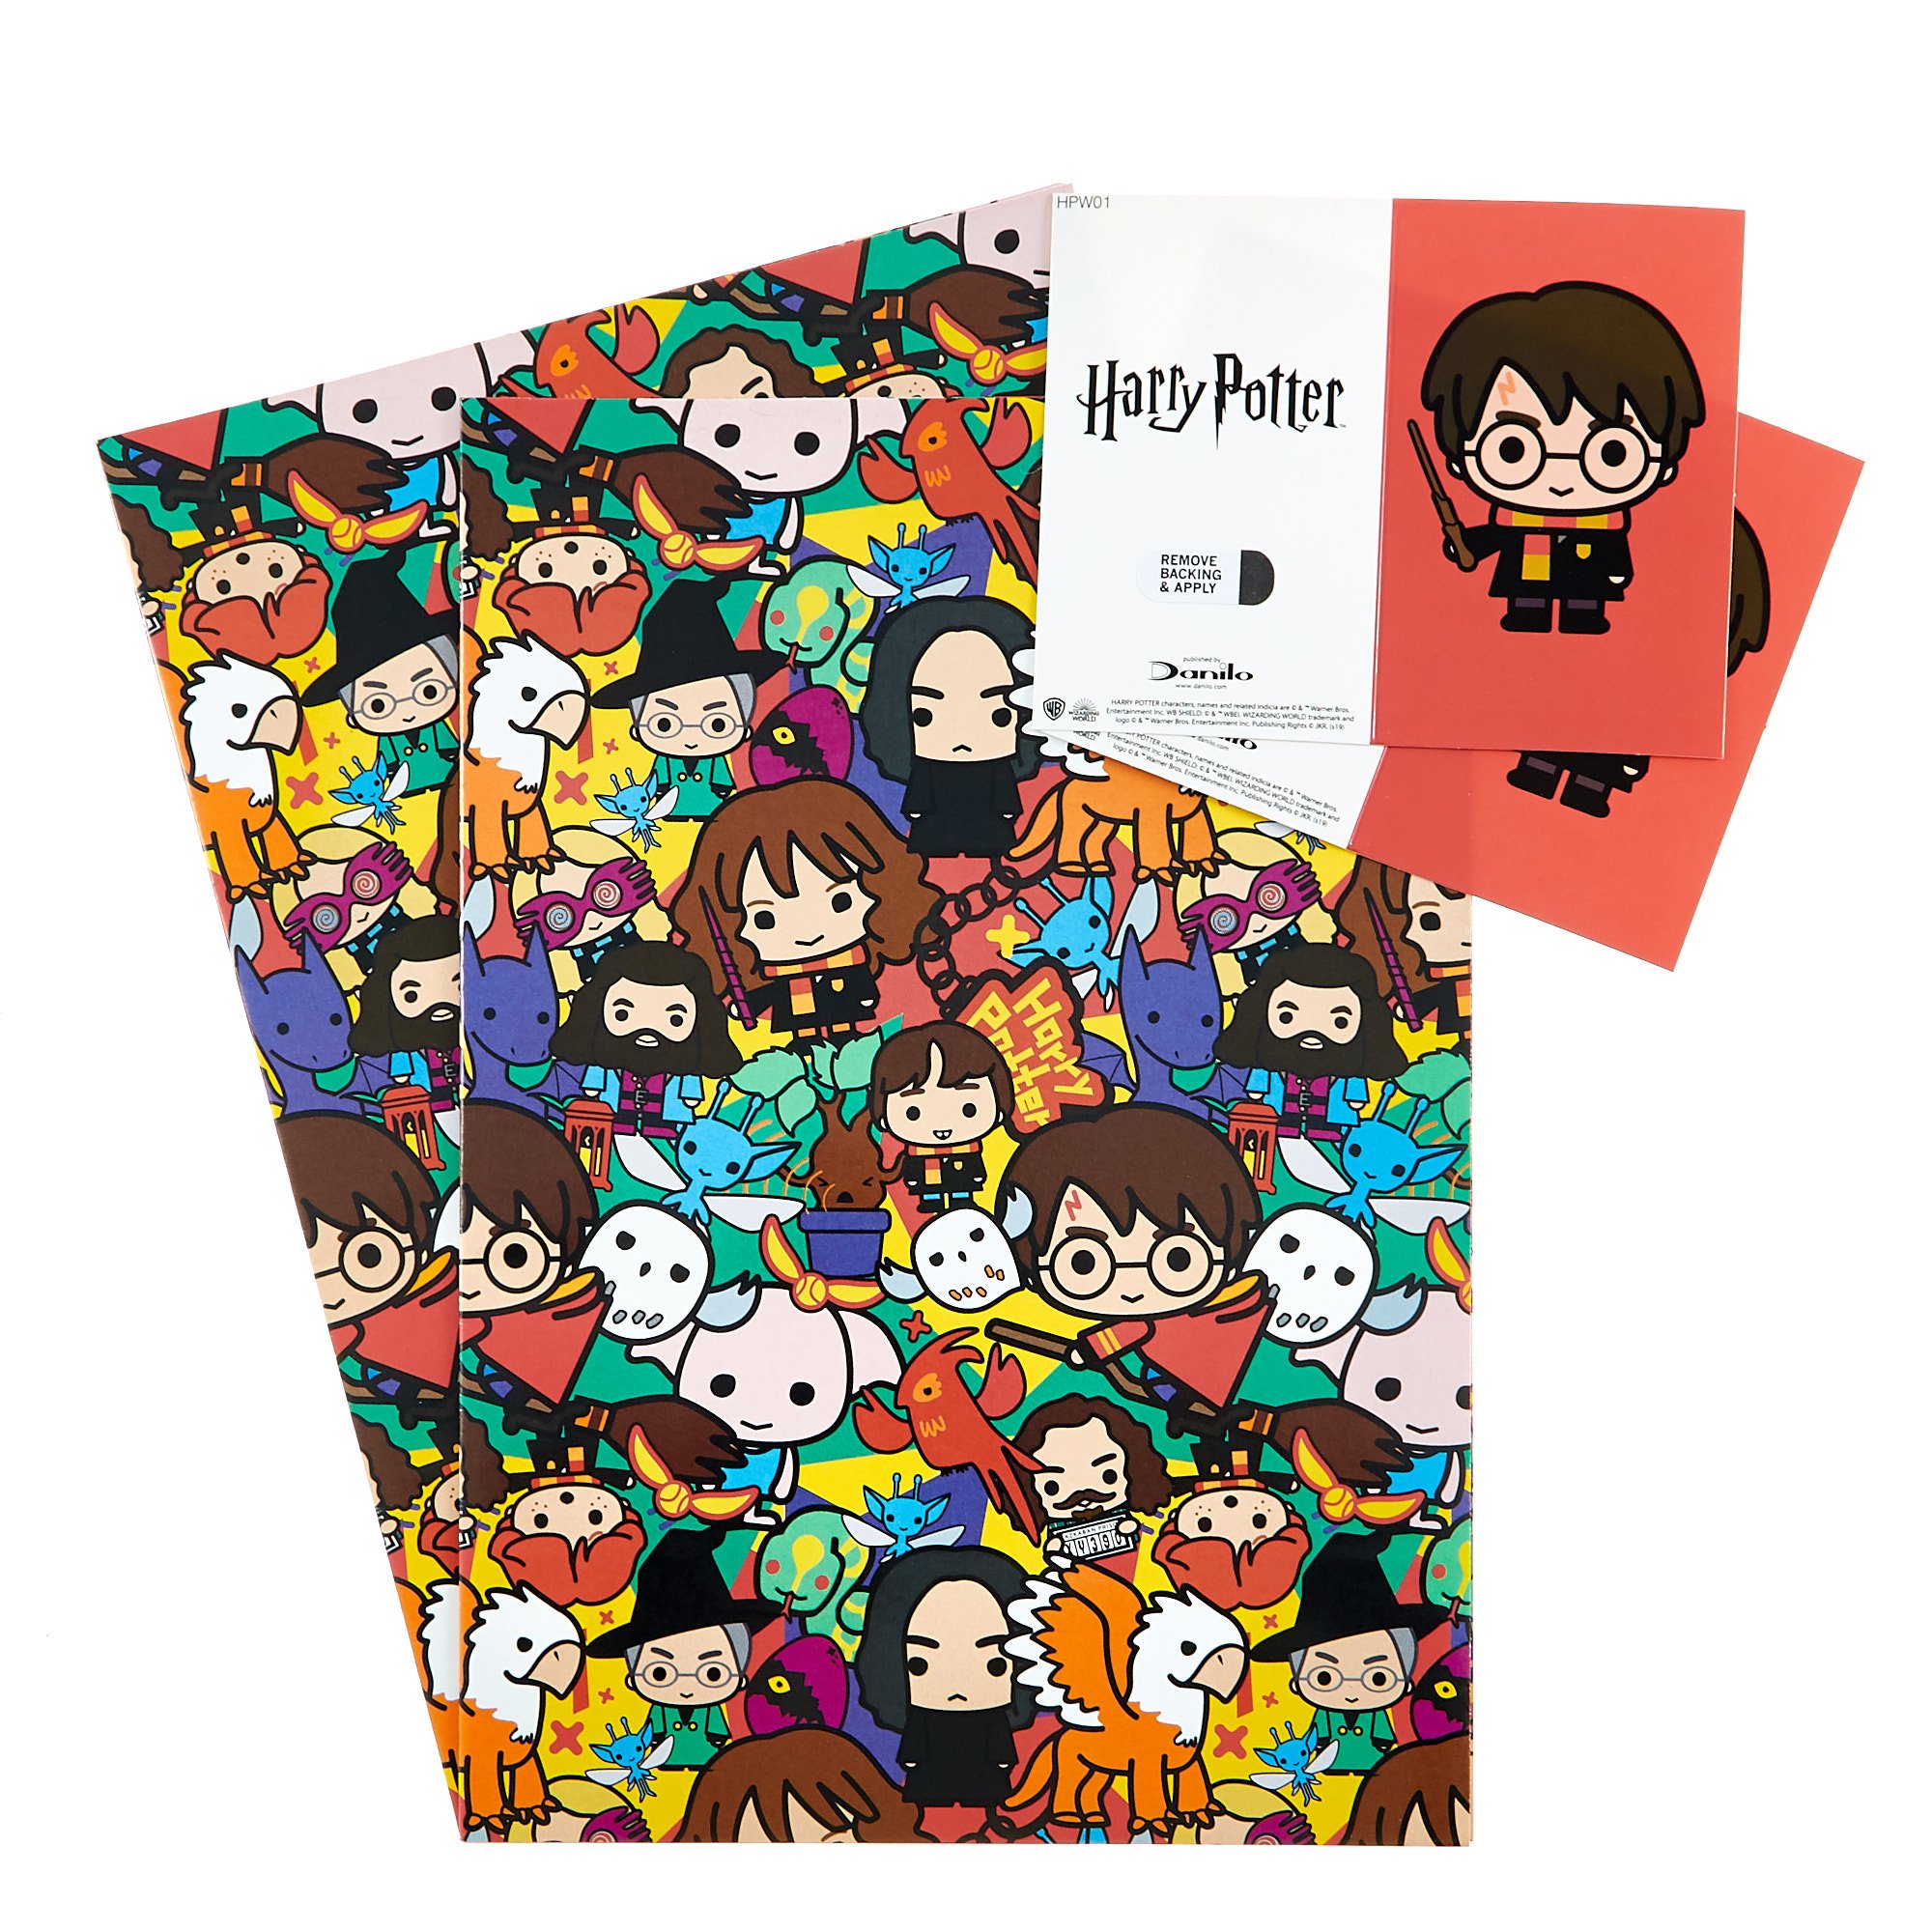 The Peculiar Treasure: Harry Potter Gift Guide for the Harry Potter Lover